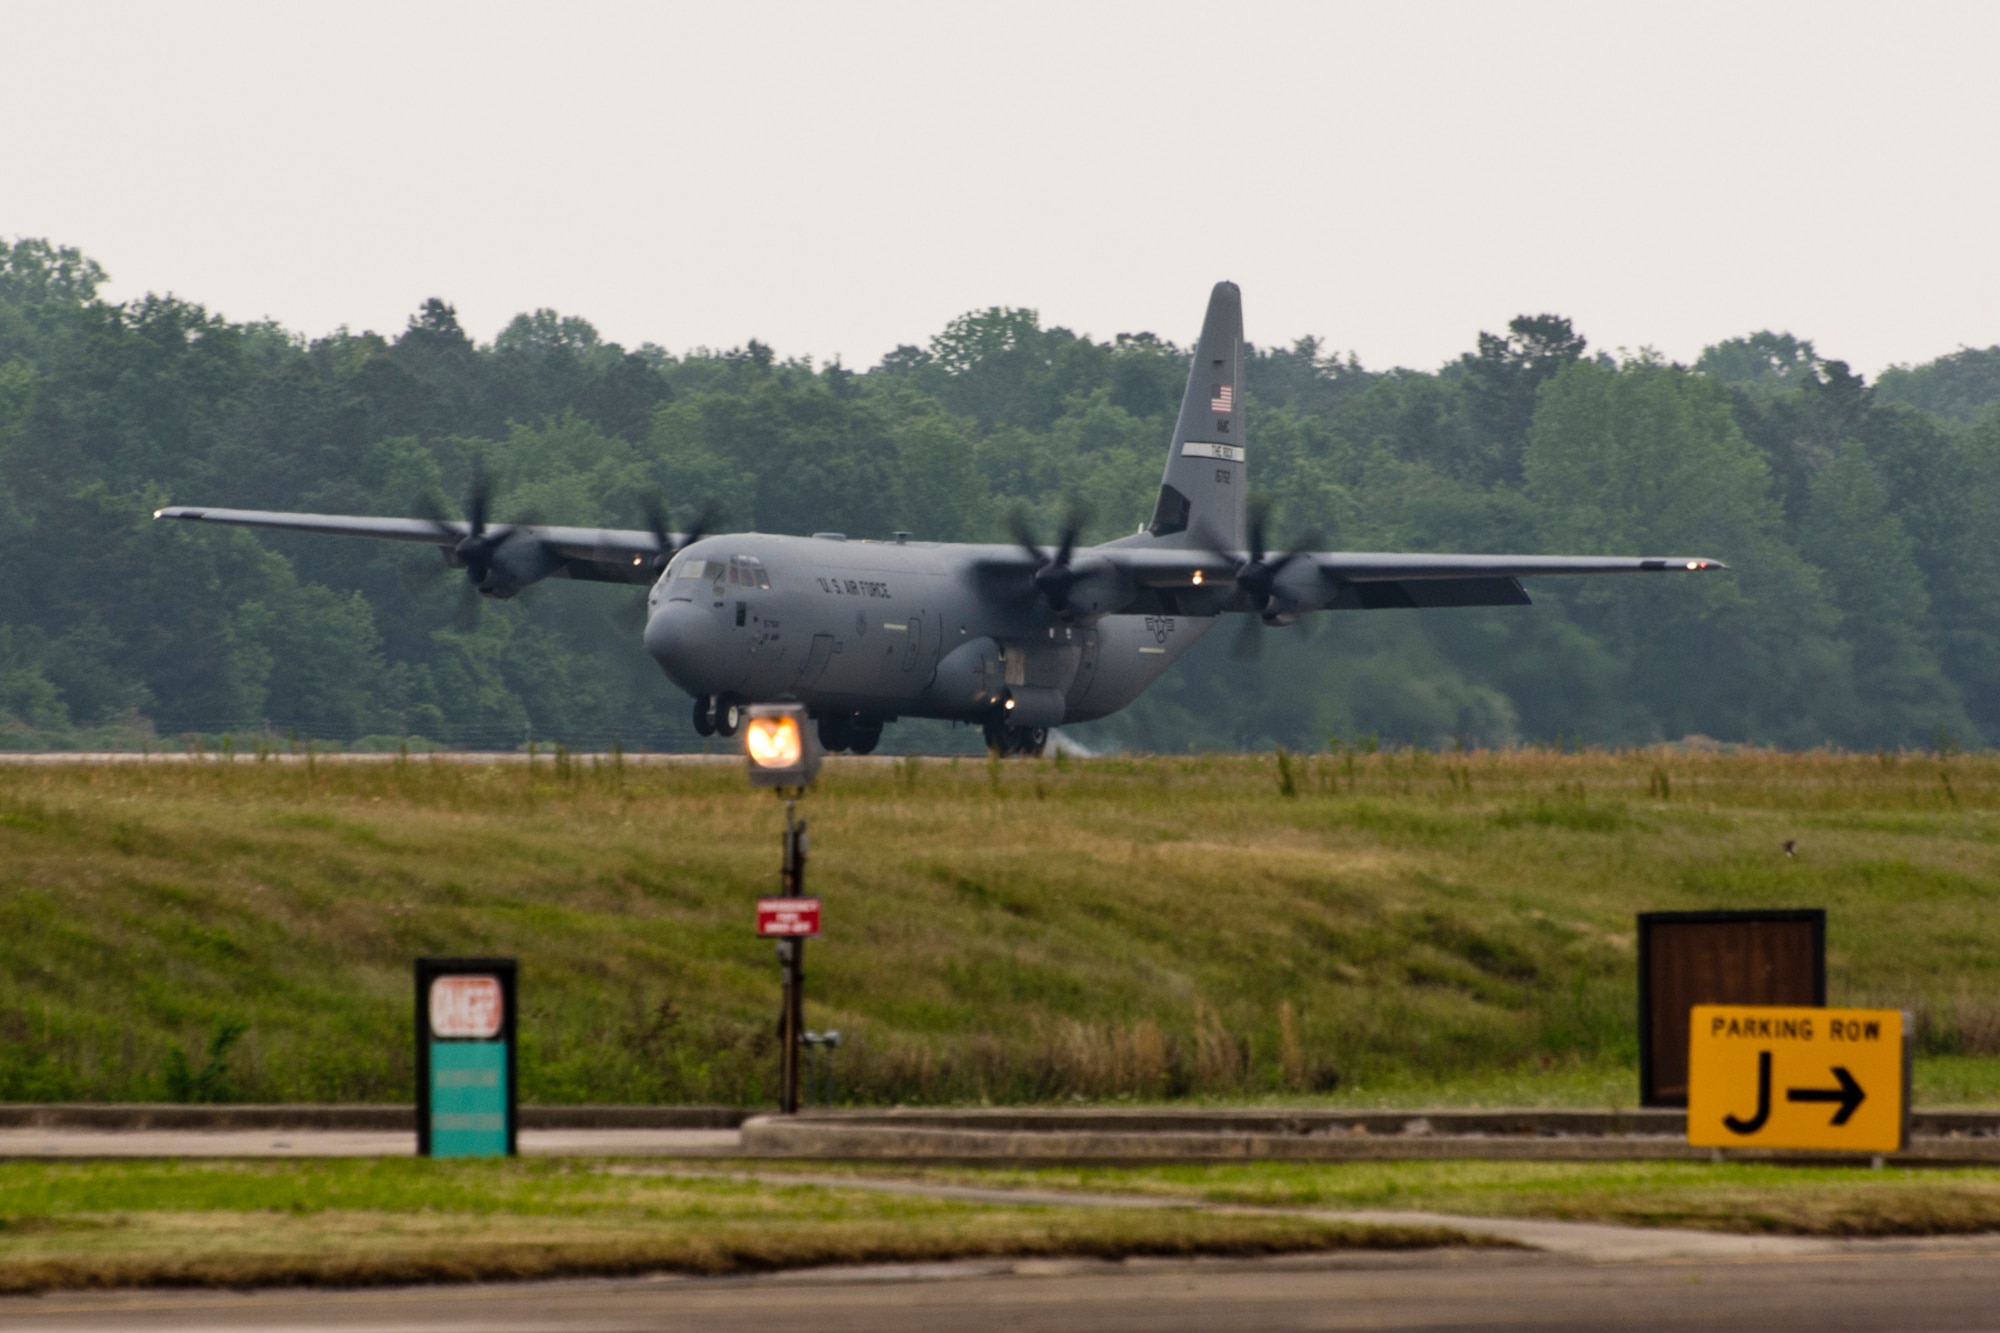 A C-130J Super Hercules carrying winners of the 2017 Air Force Reserve Command Port Dawg Challenge touches down at Little Rock Air Force Base, Ark., April 28, 2017. The competition took place from April 25-27, at Dobbins Air Reserve Base, Ga., pitting 23 teams against each other in 12 different events designed to foster communication, leadership, professionalism and camaraderie between the participants. (U.S. Air Force photo by Master Sgt. Jeff Walston/Released)